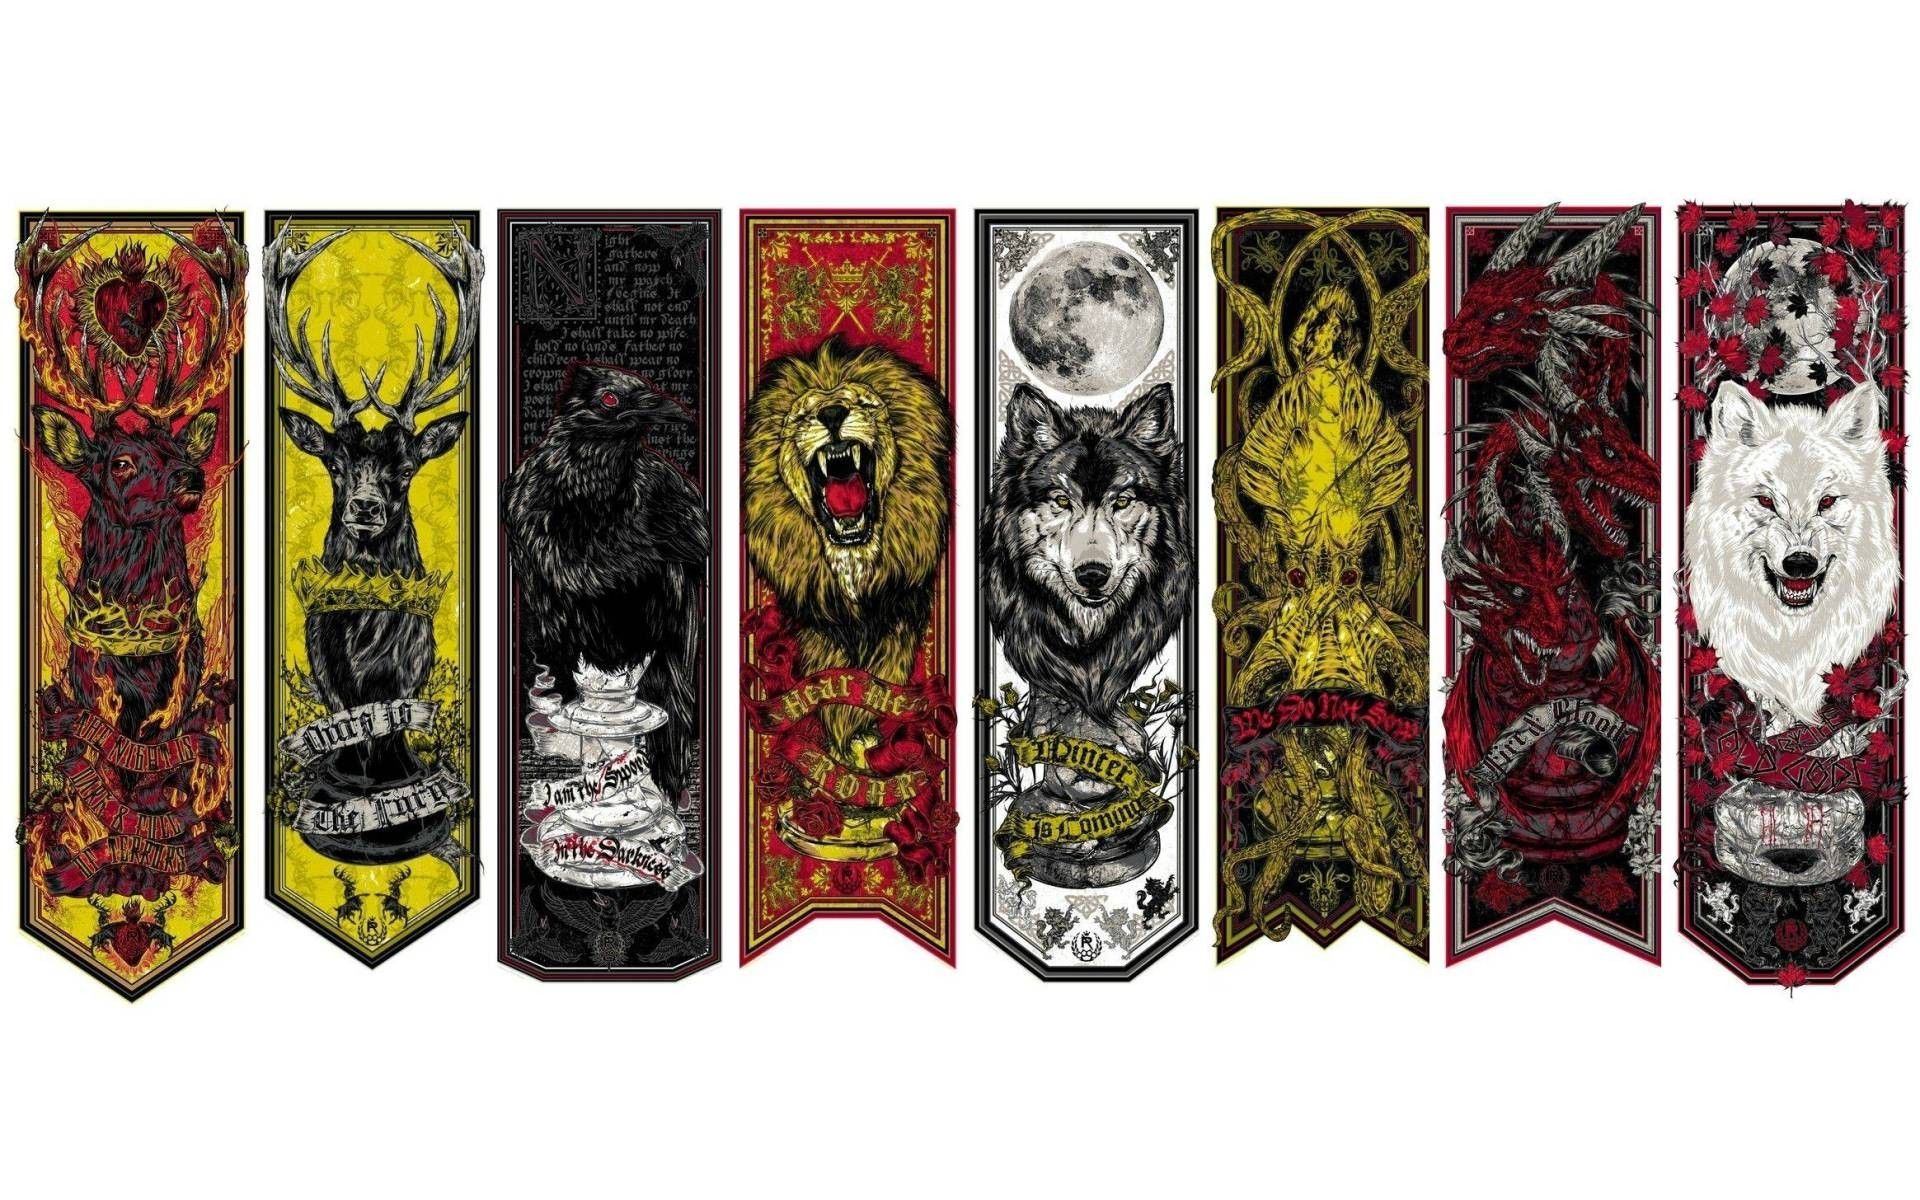 Game Of Thrones Banners Wallpapers